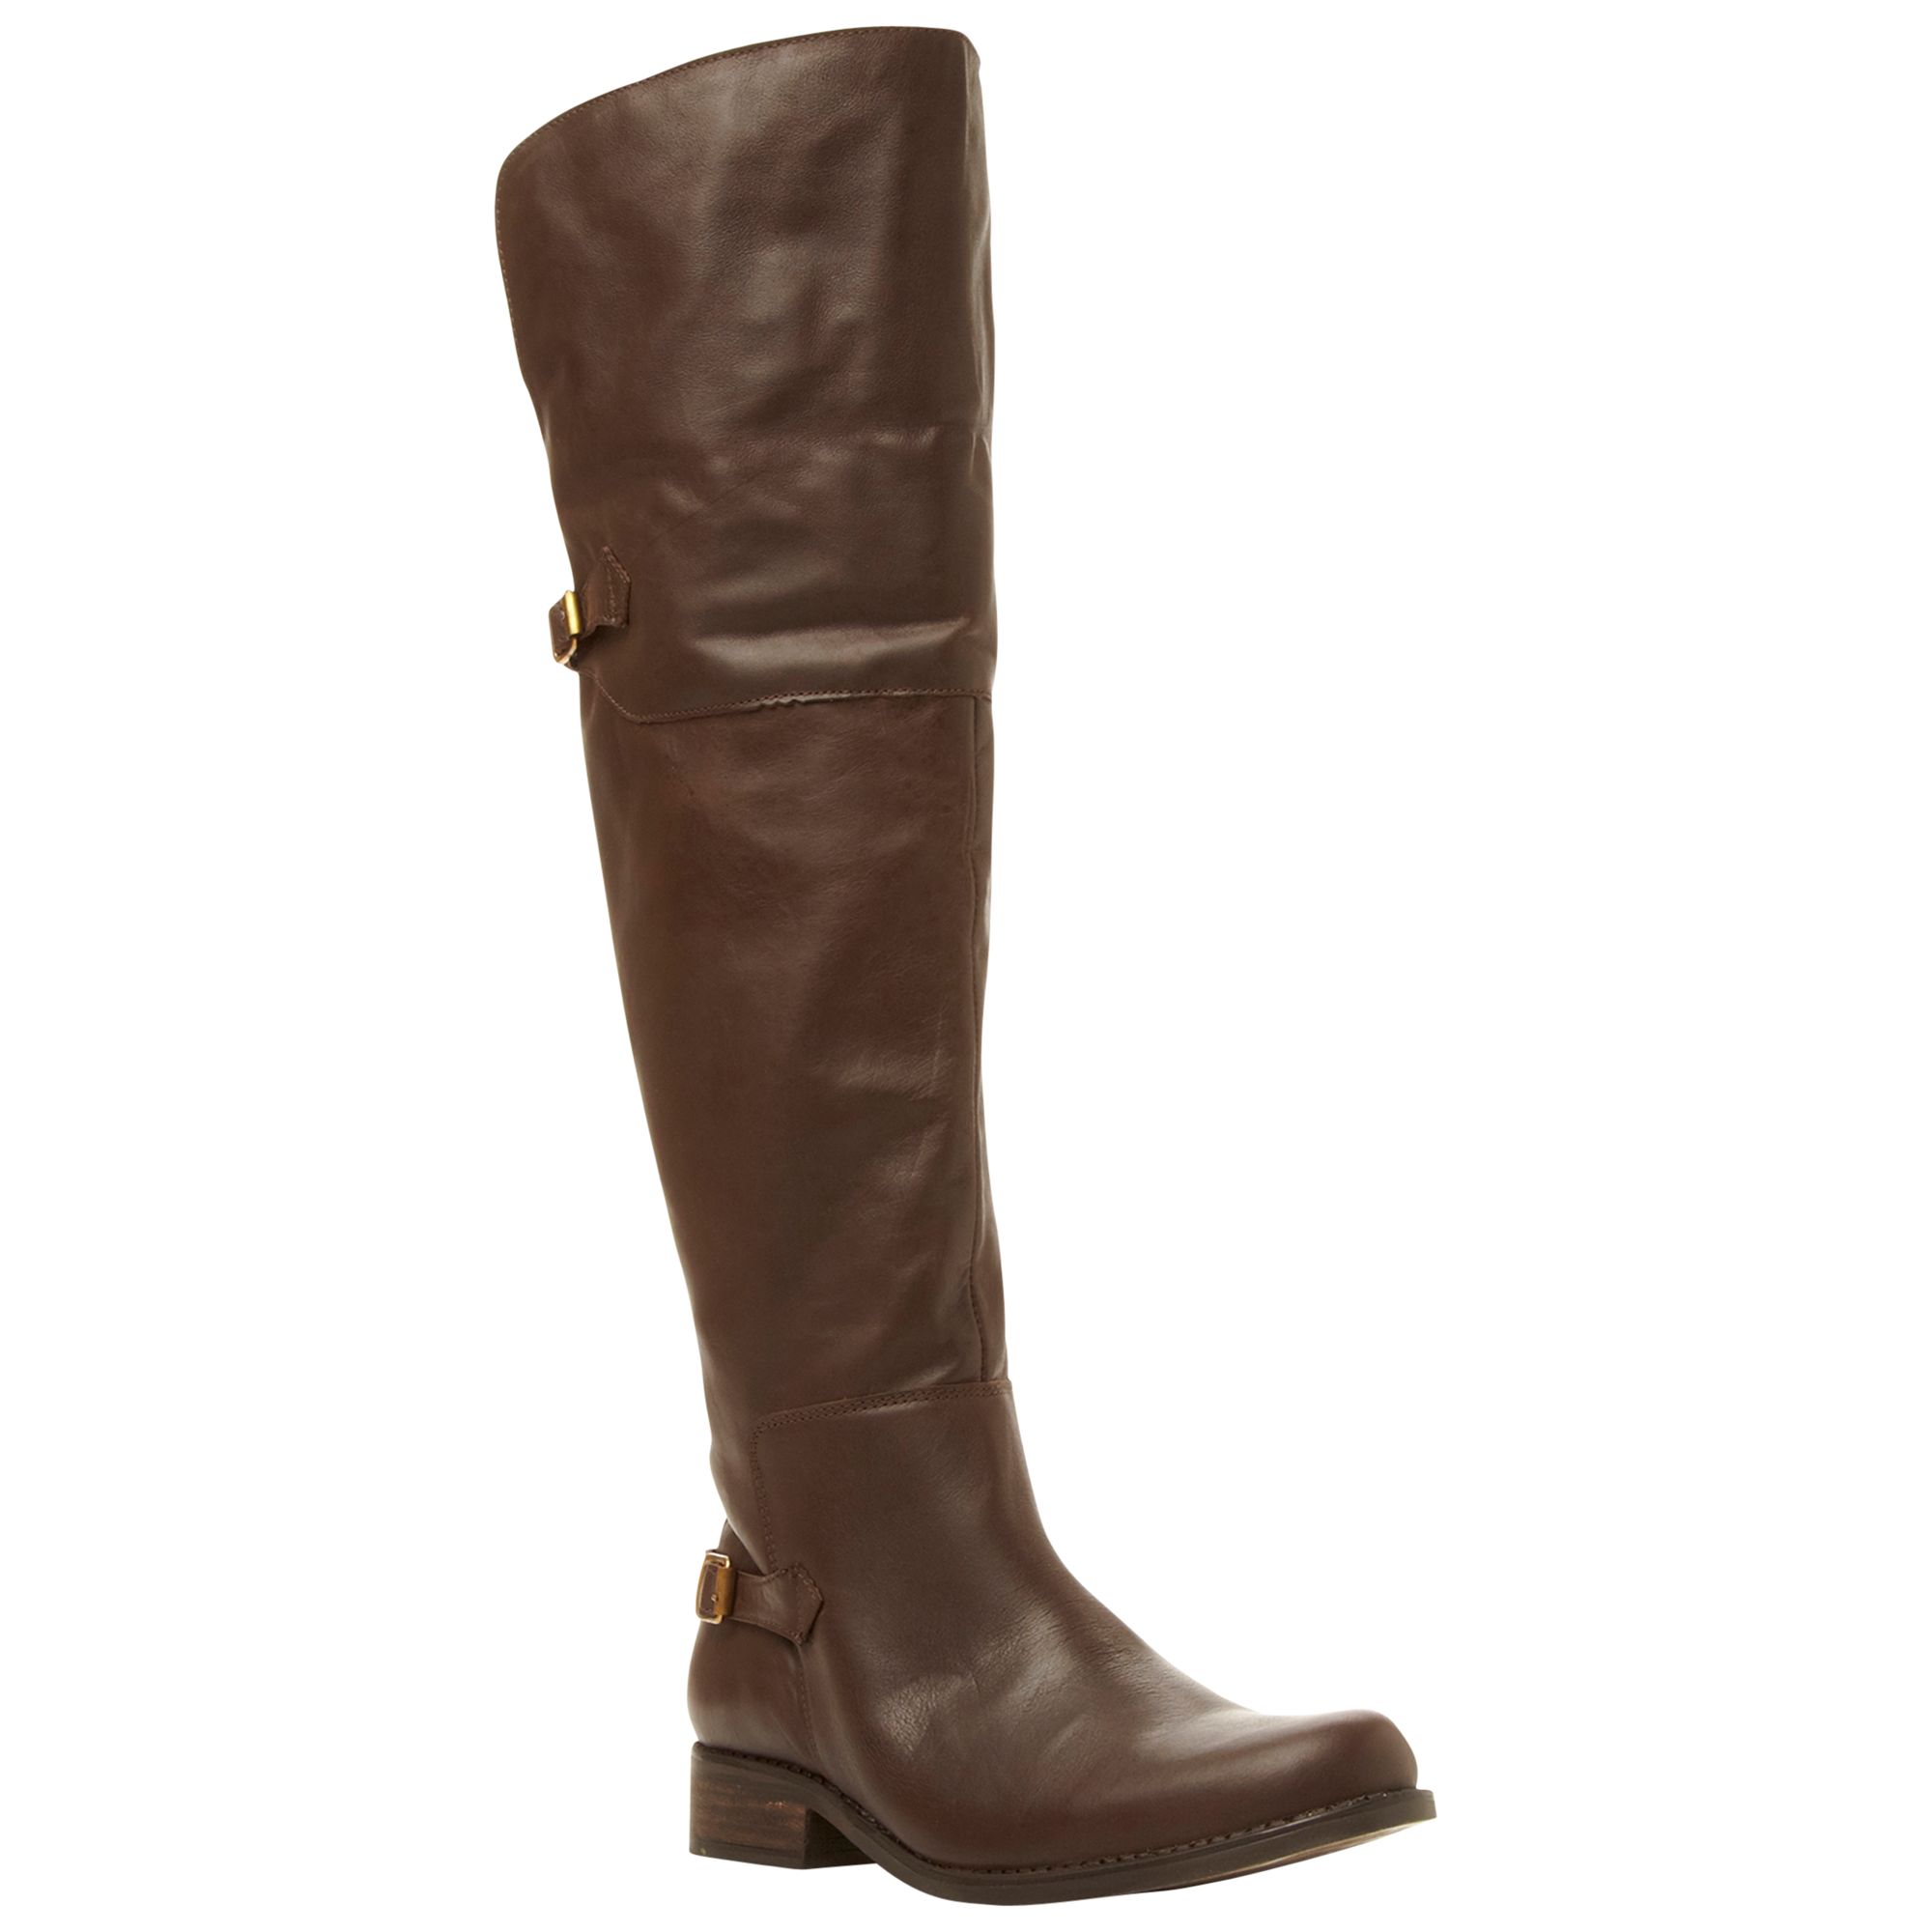 Buy Steve Madden Ottowa Leather Over the Knee Boots Online at ...